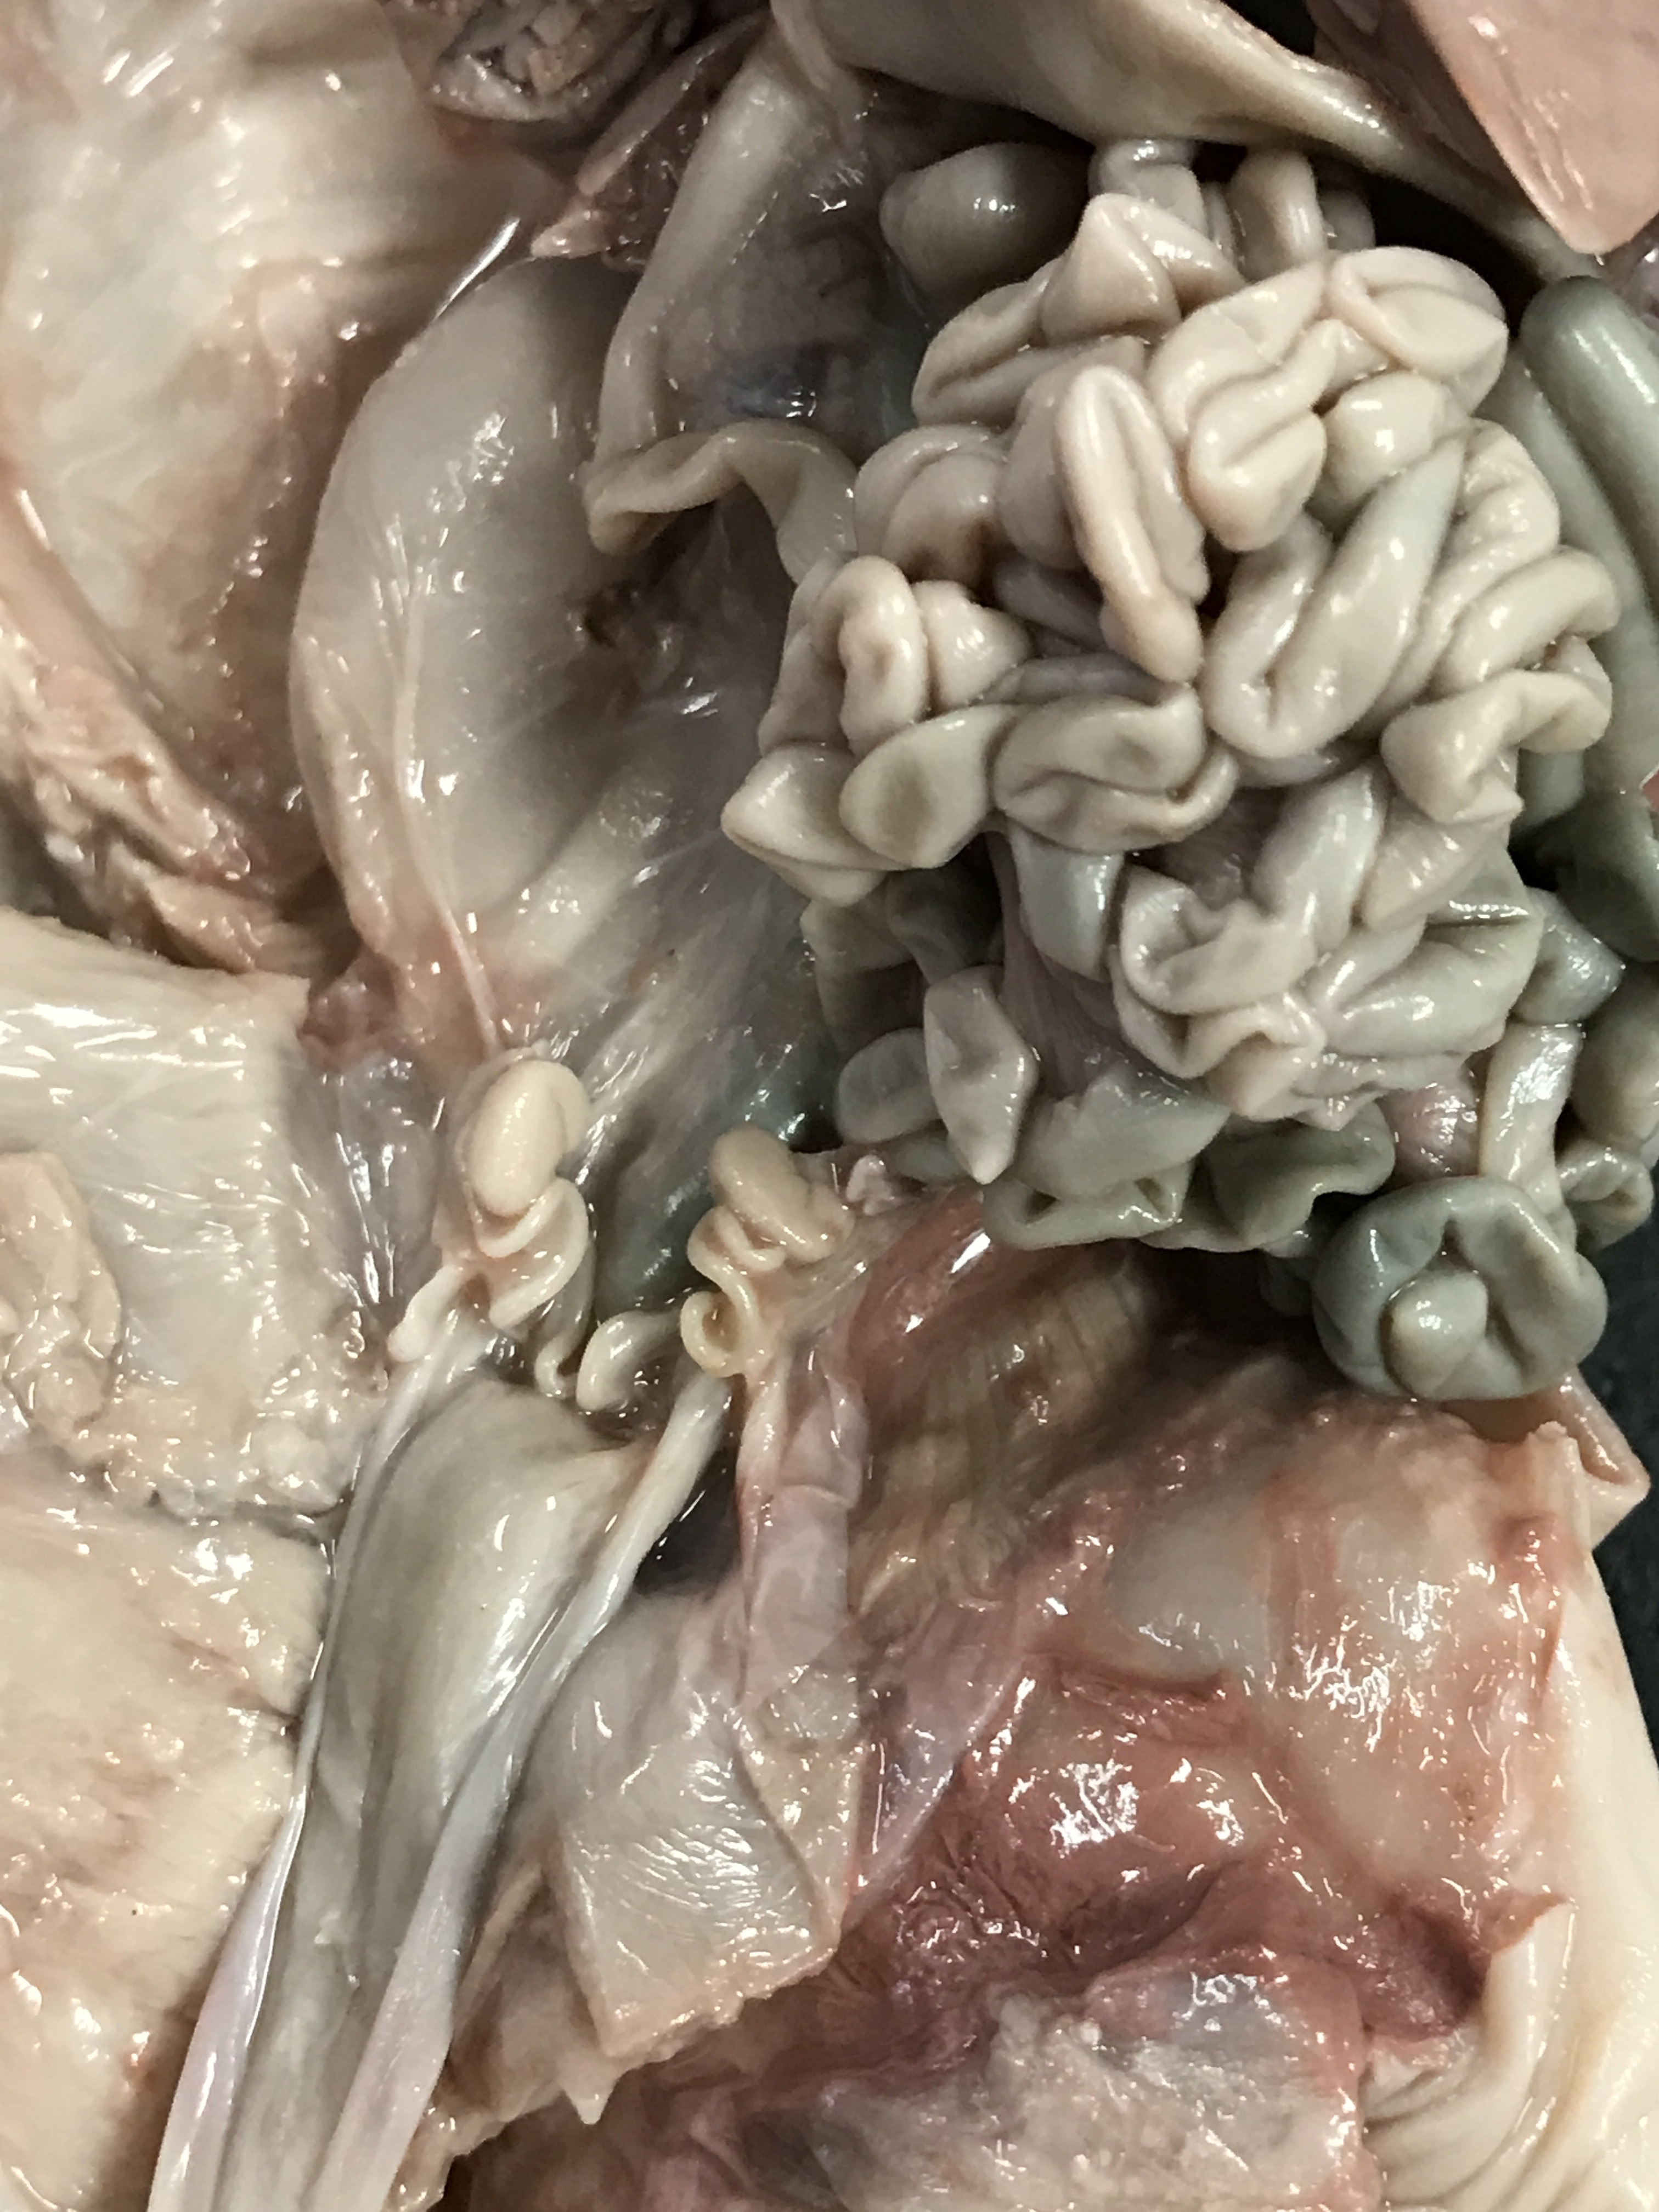 Close-up of the uterus and ovaries.